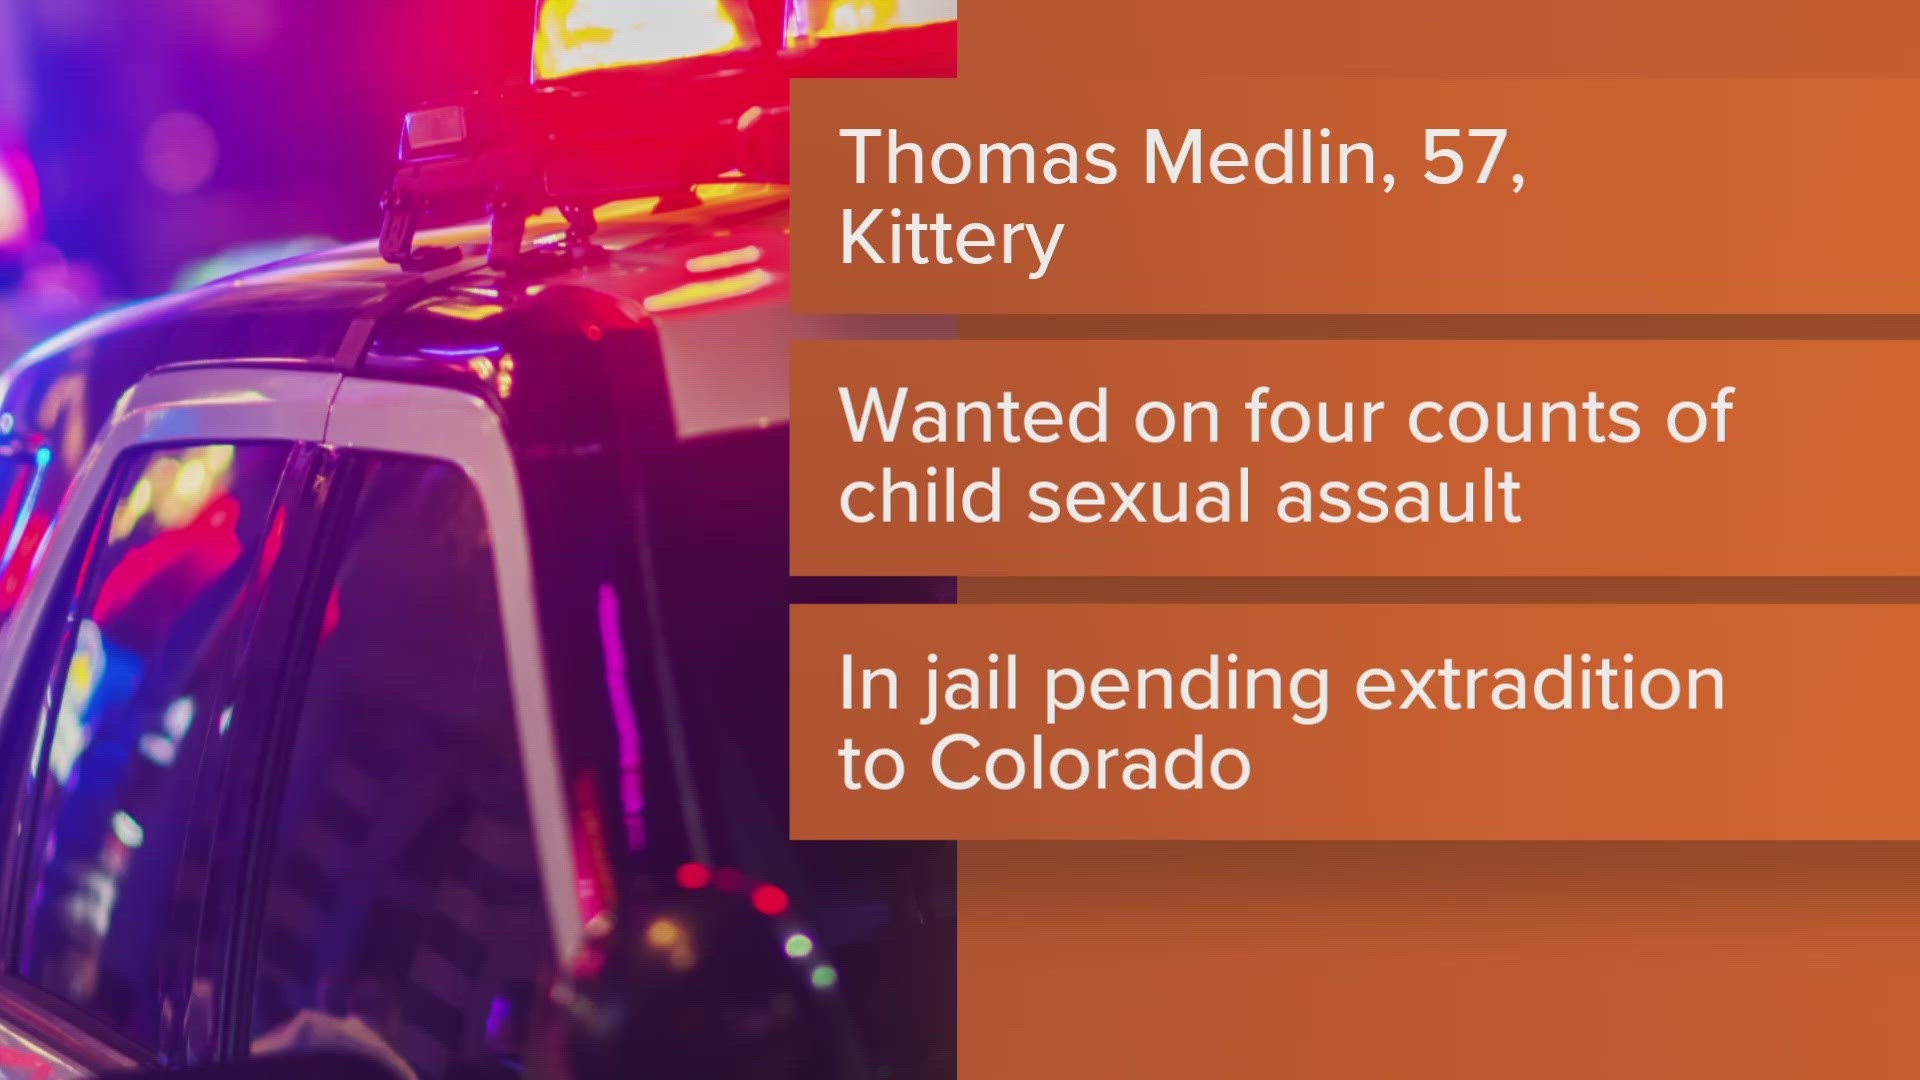 Police said Thomas Medlin, 57, is wanted in Colorado on four counts of child sexual assault. He's now in police custody.